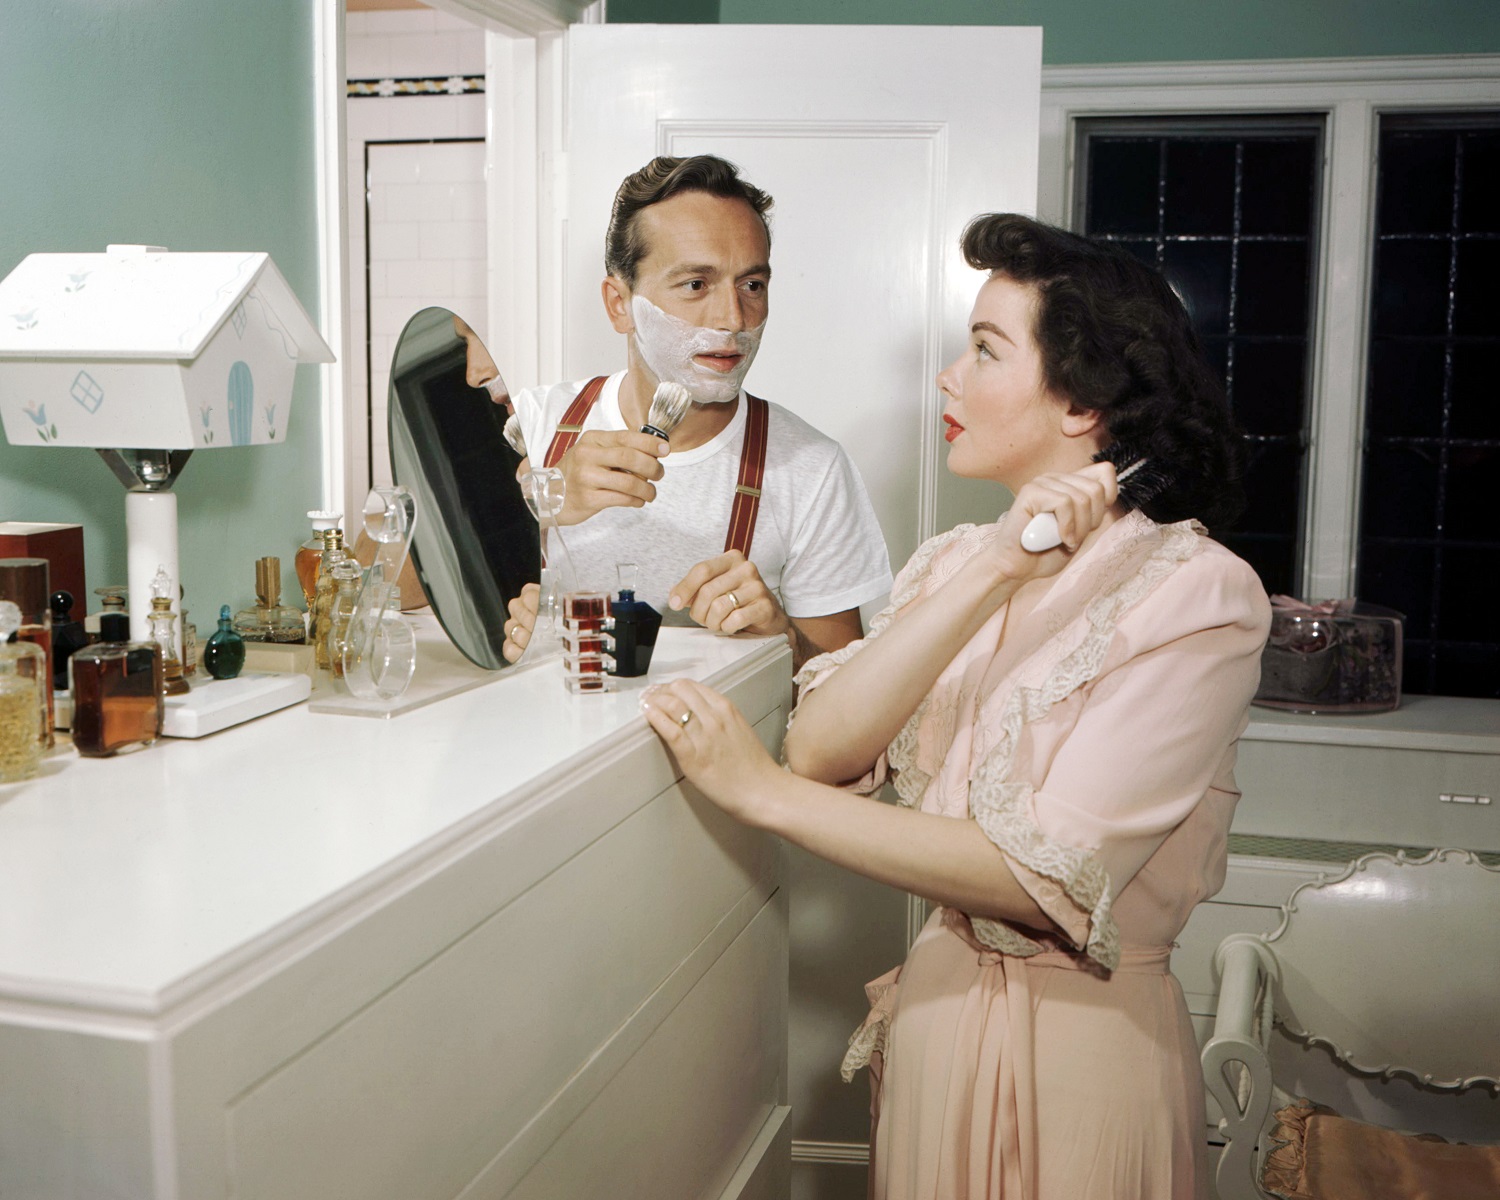 American actress Kathryn Grayson (1922 - 2010) brushes her hair, while her husband, actor and singer Johnnie Johnston (1915 - 1996), shaves, circa 1950. (Photo by Silver Screen Collection/Getty Images)